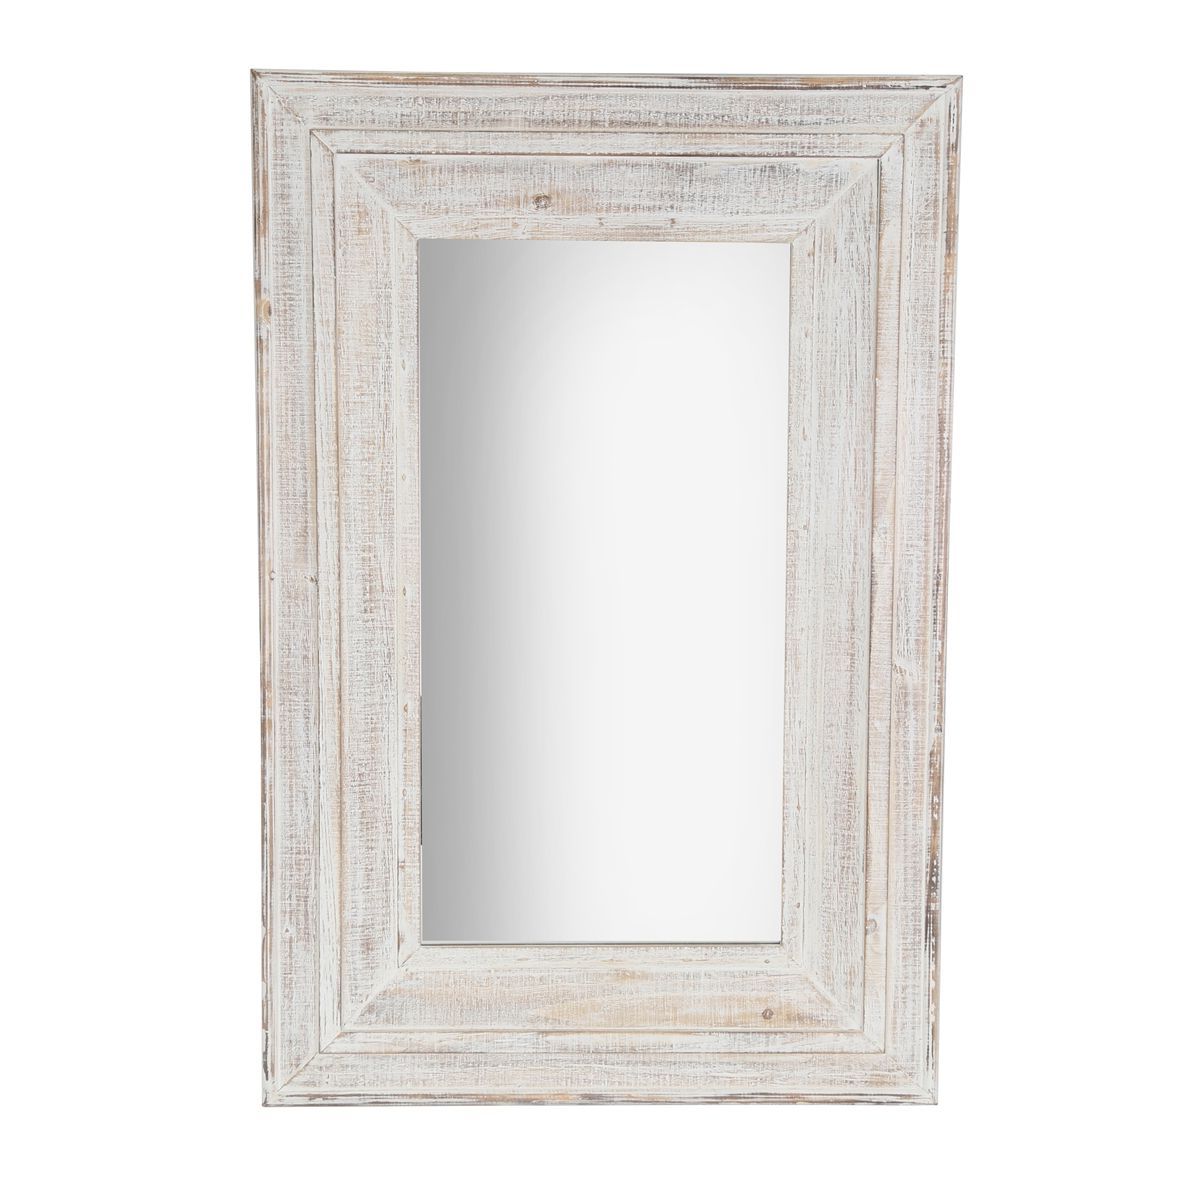 White Wood Wall Mirrors Pertaining To Current Antique White Wood Frame Wall Mirror (View 4 of 15)